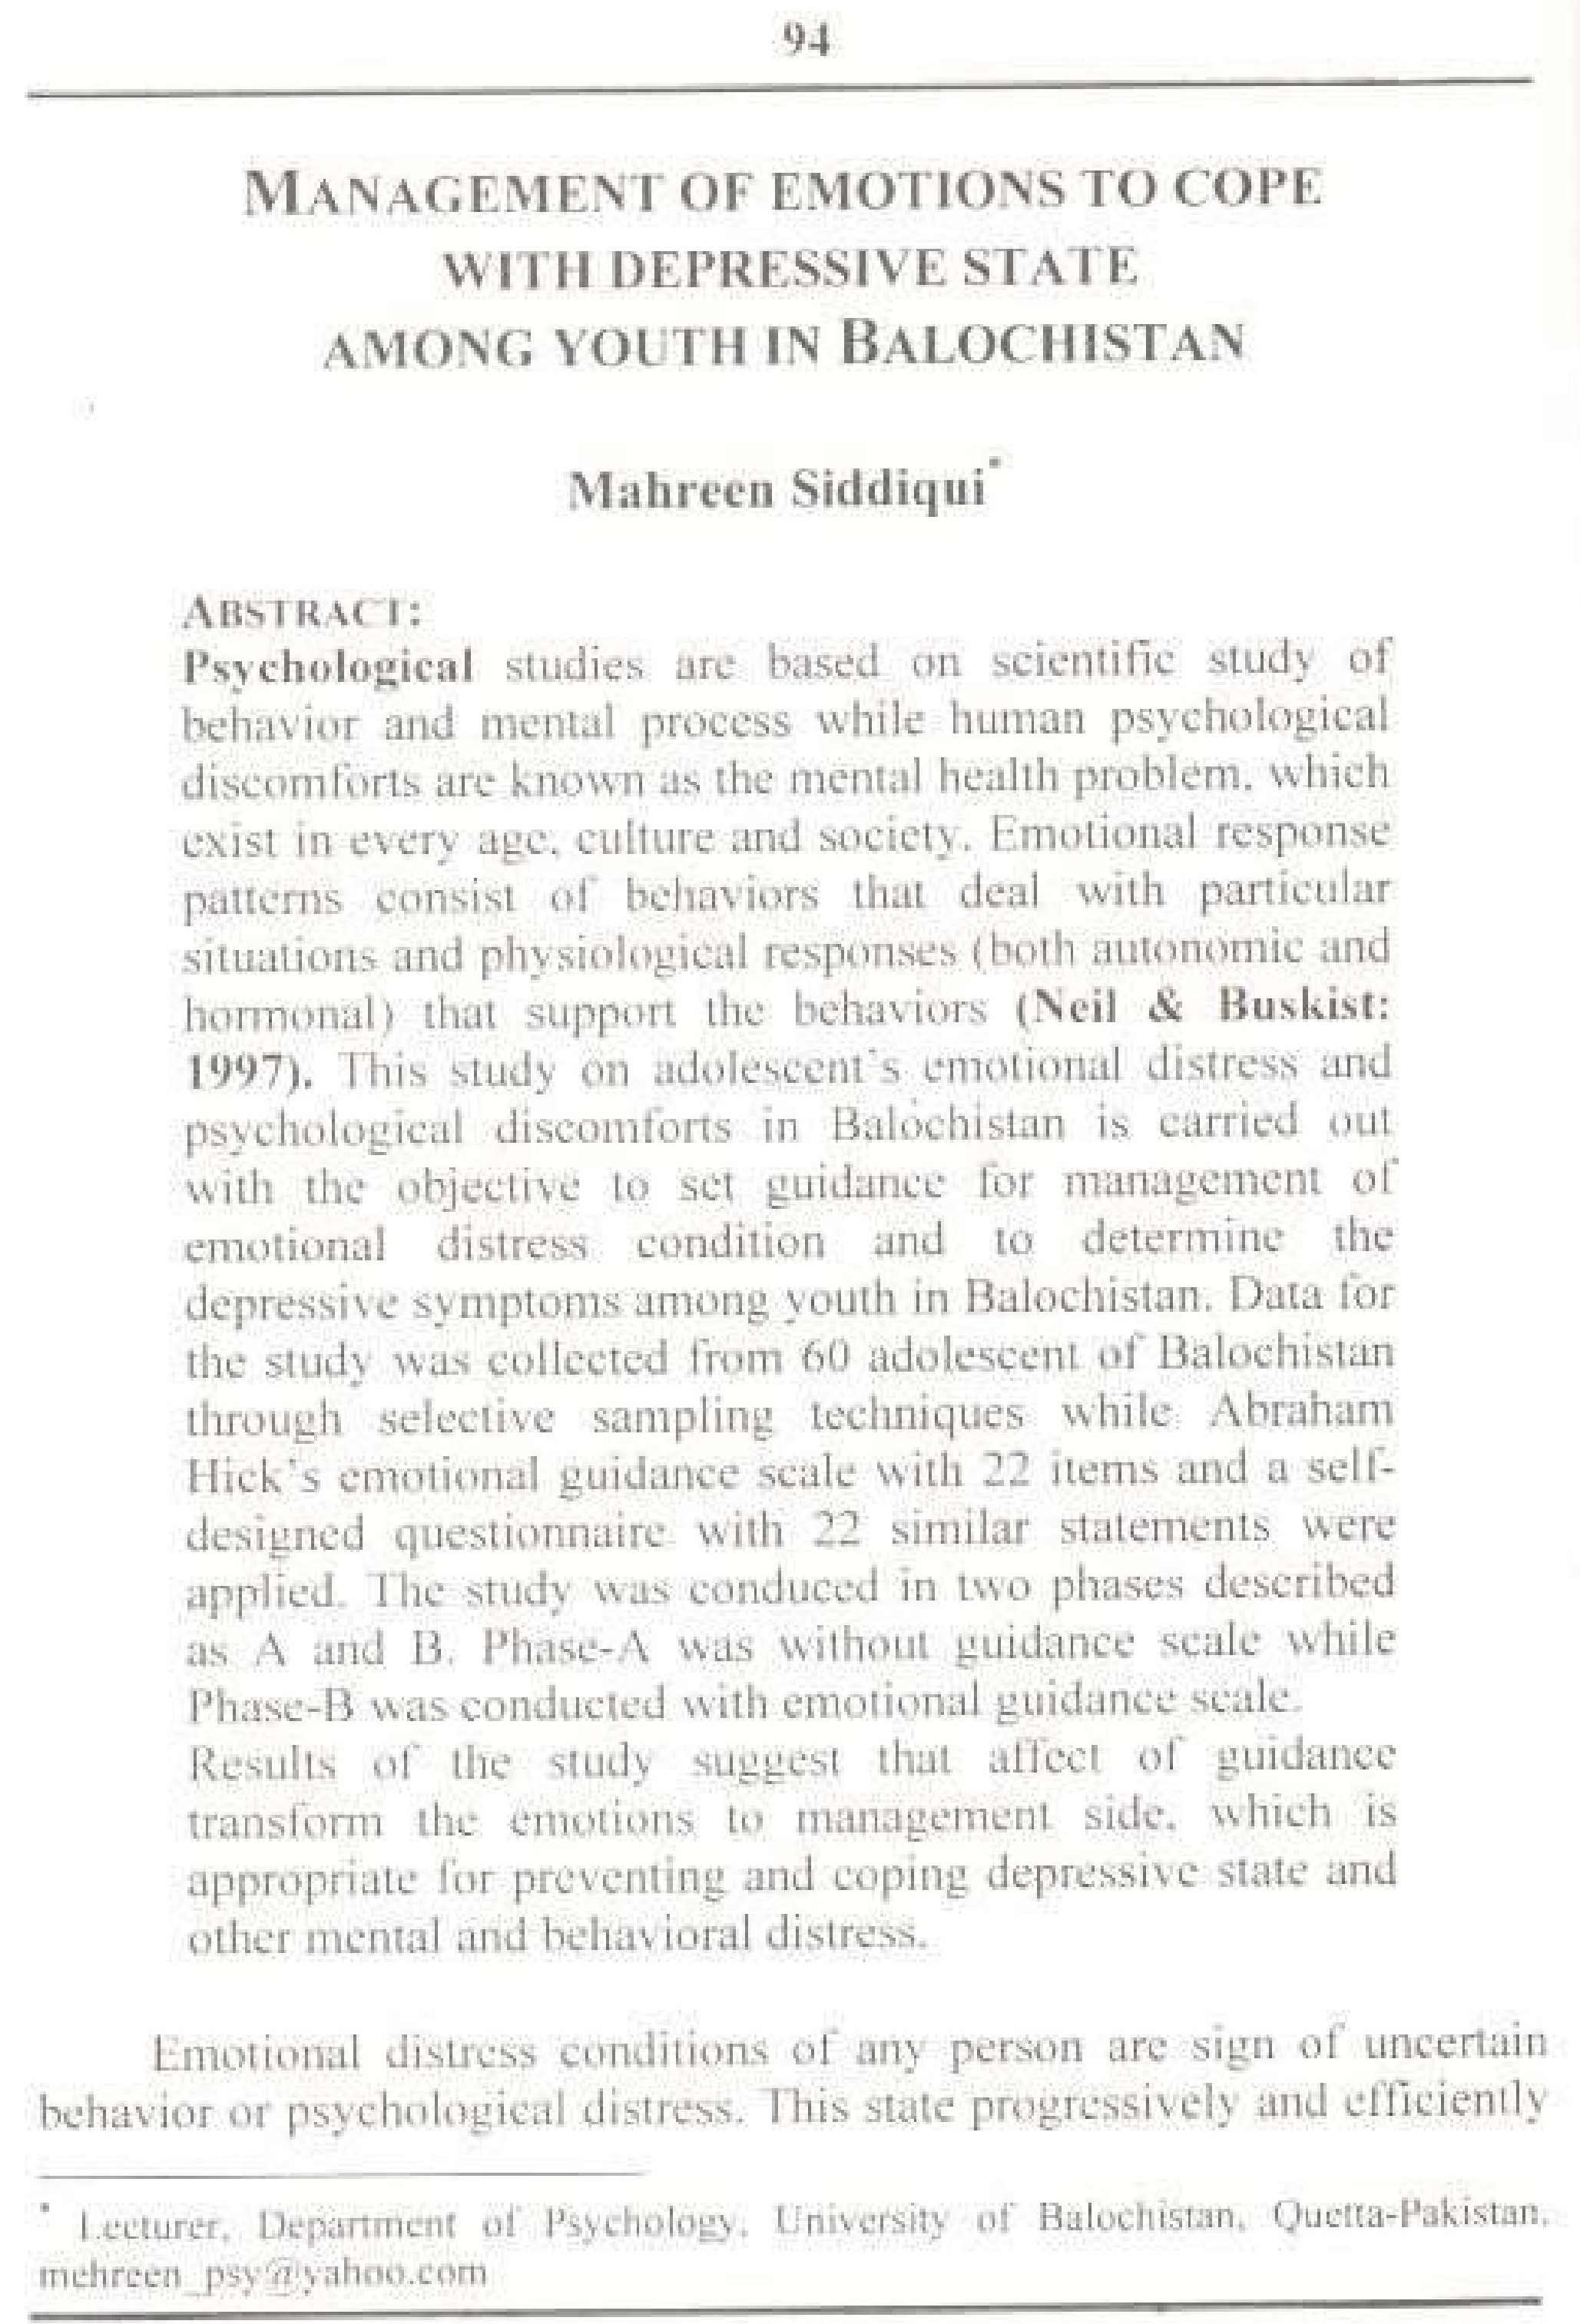 Management of Emotions to Cope with depressive state among youth in Balochsitan.